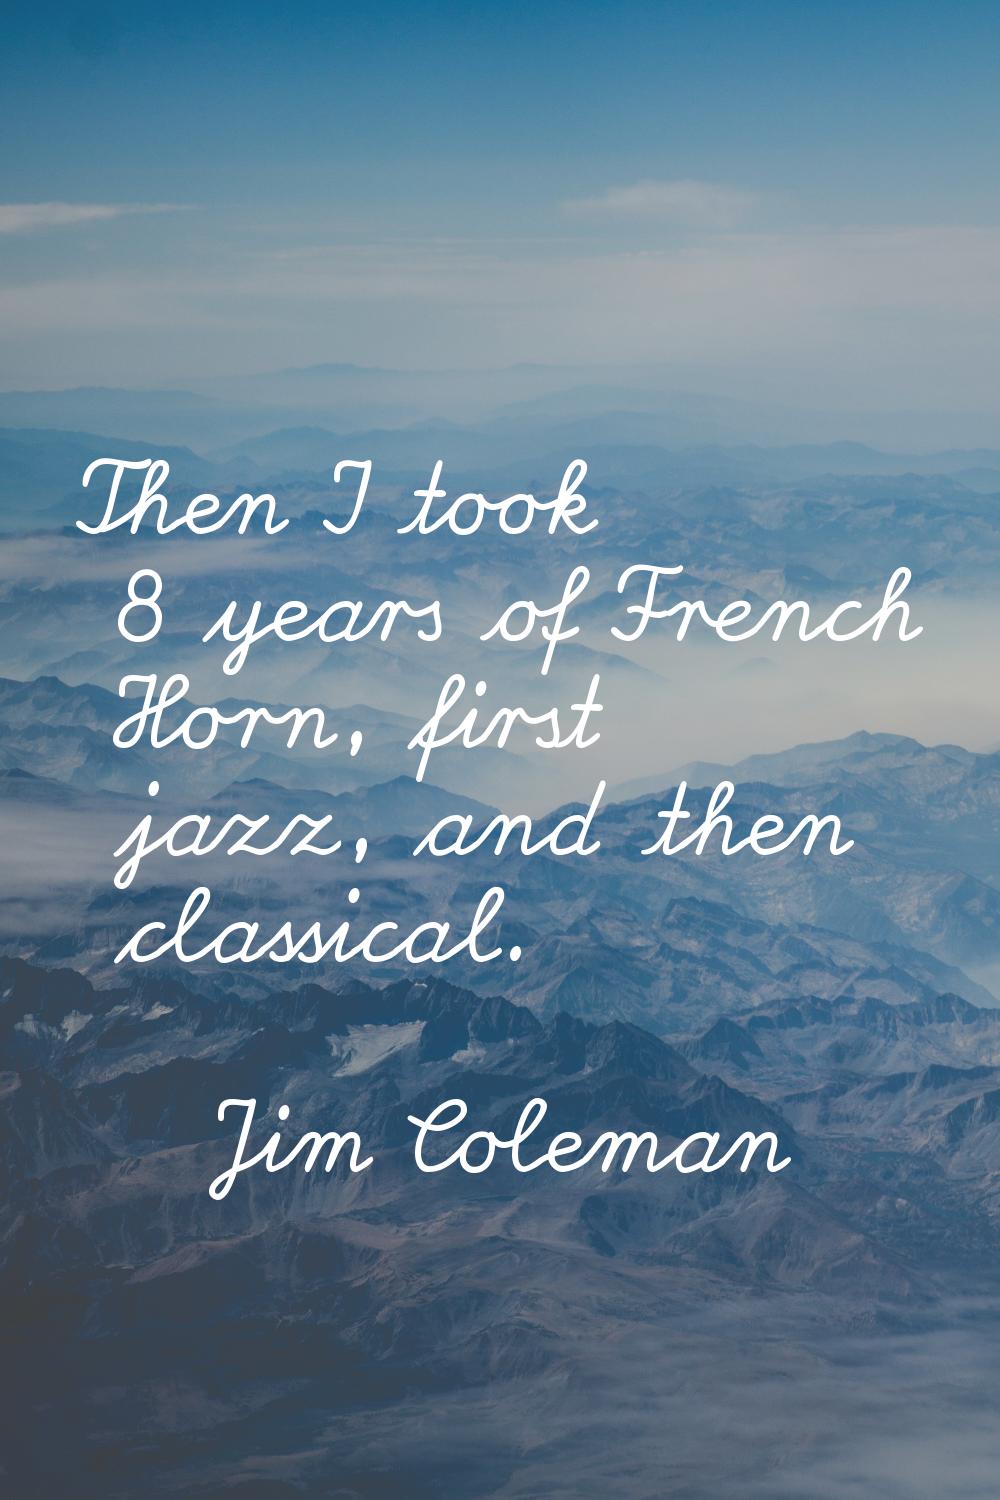 Then I took 8 years of French Horn, first jazz, and then classical.